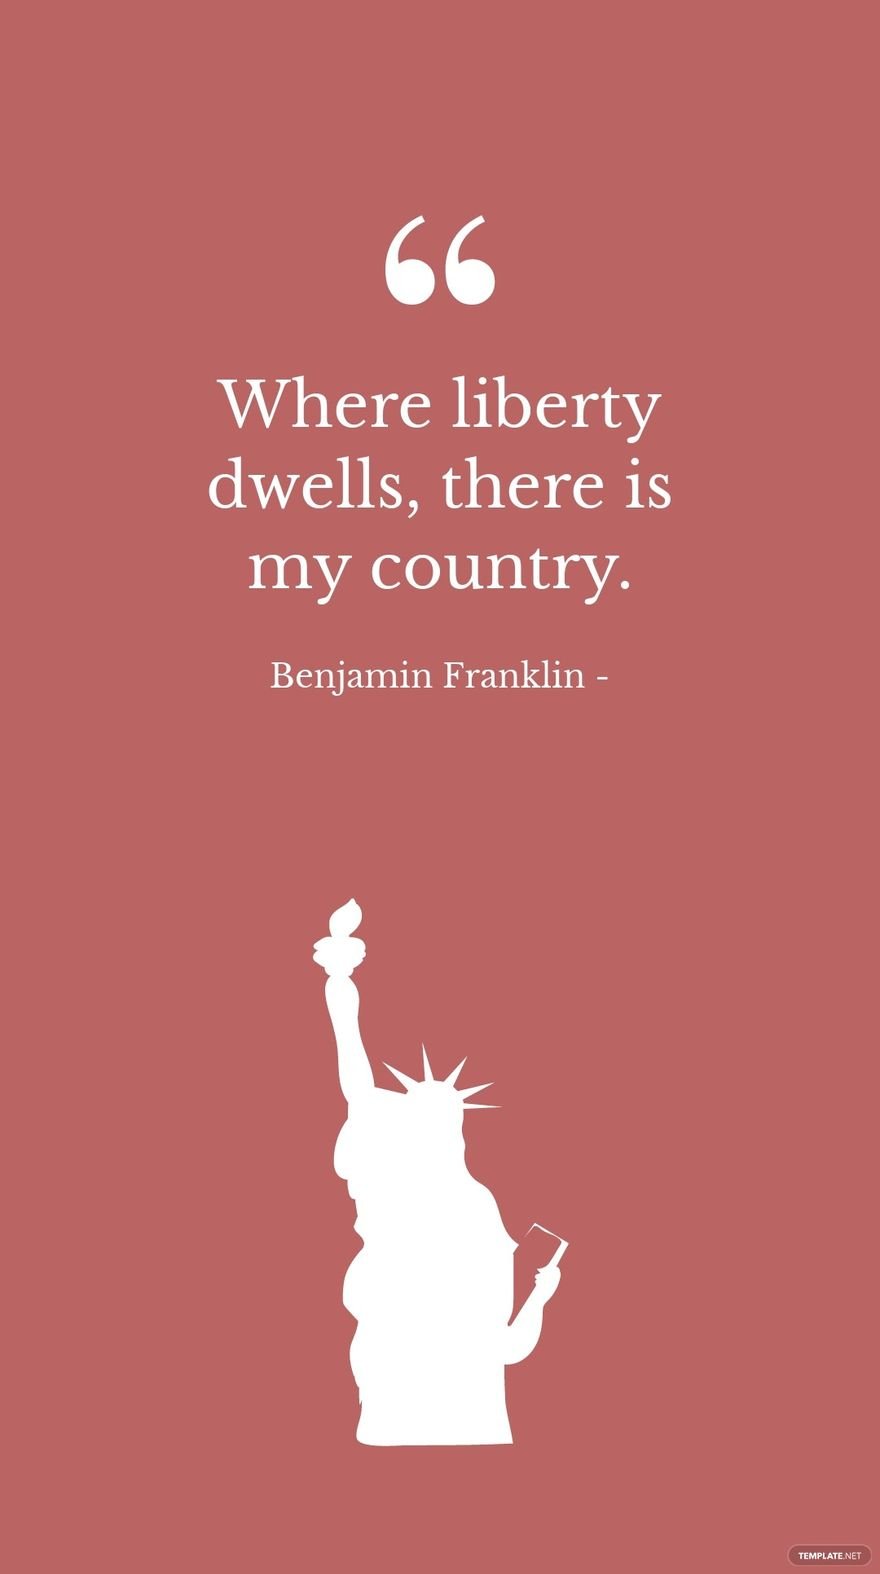 Benjamin Franklin - Where liberty dwells, there is my country.